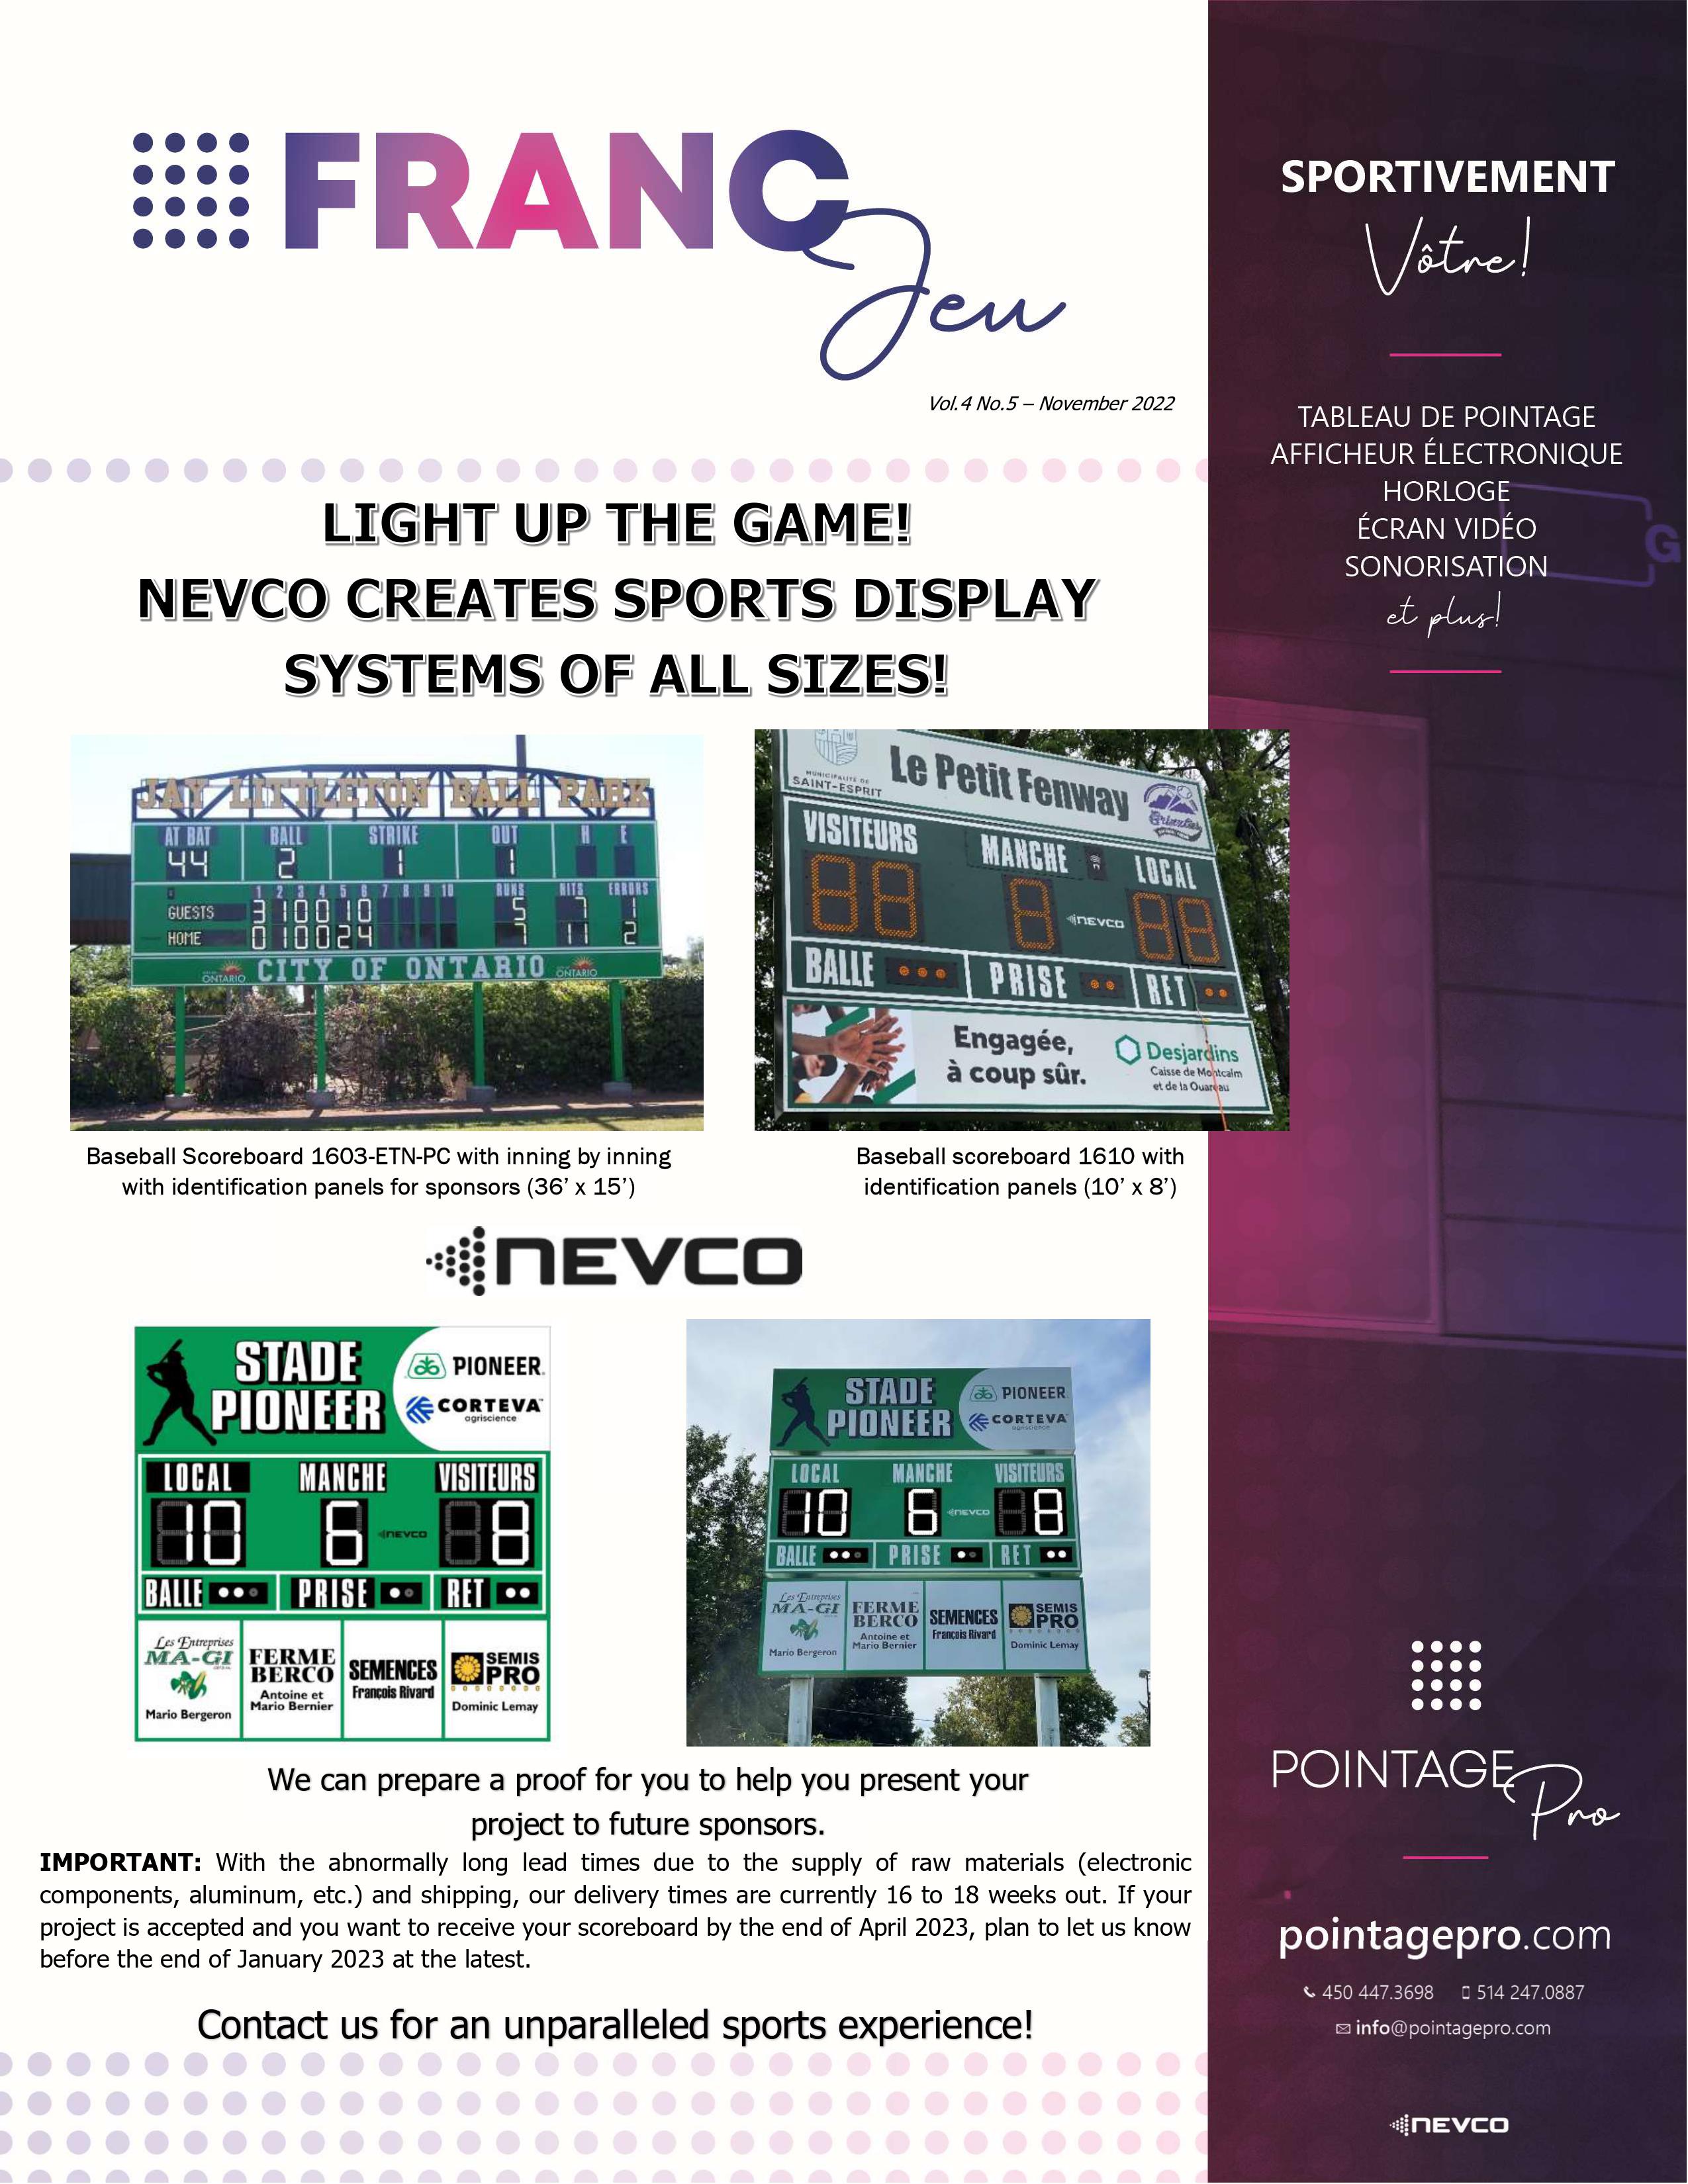 Light up your game with a Nevco Baseball Scoreboard